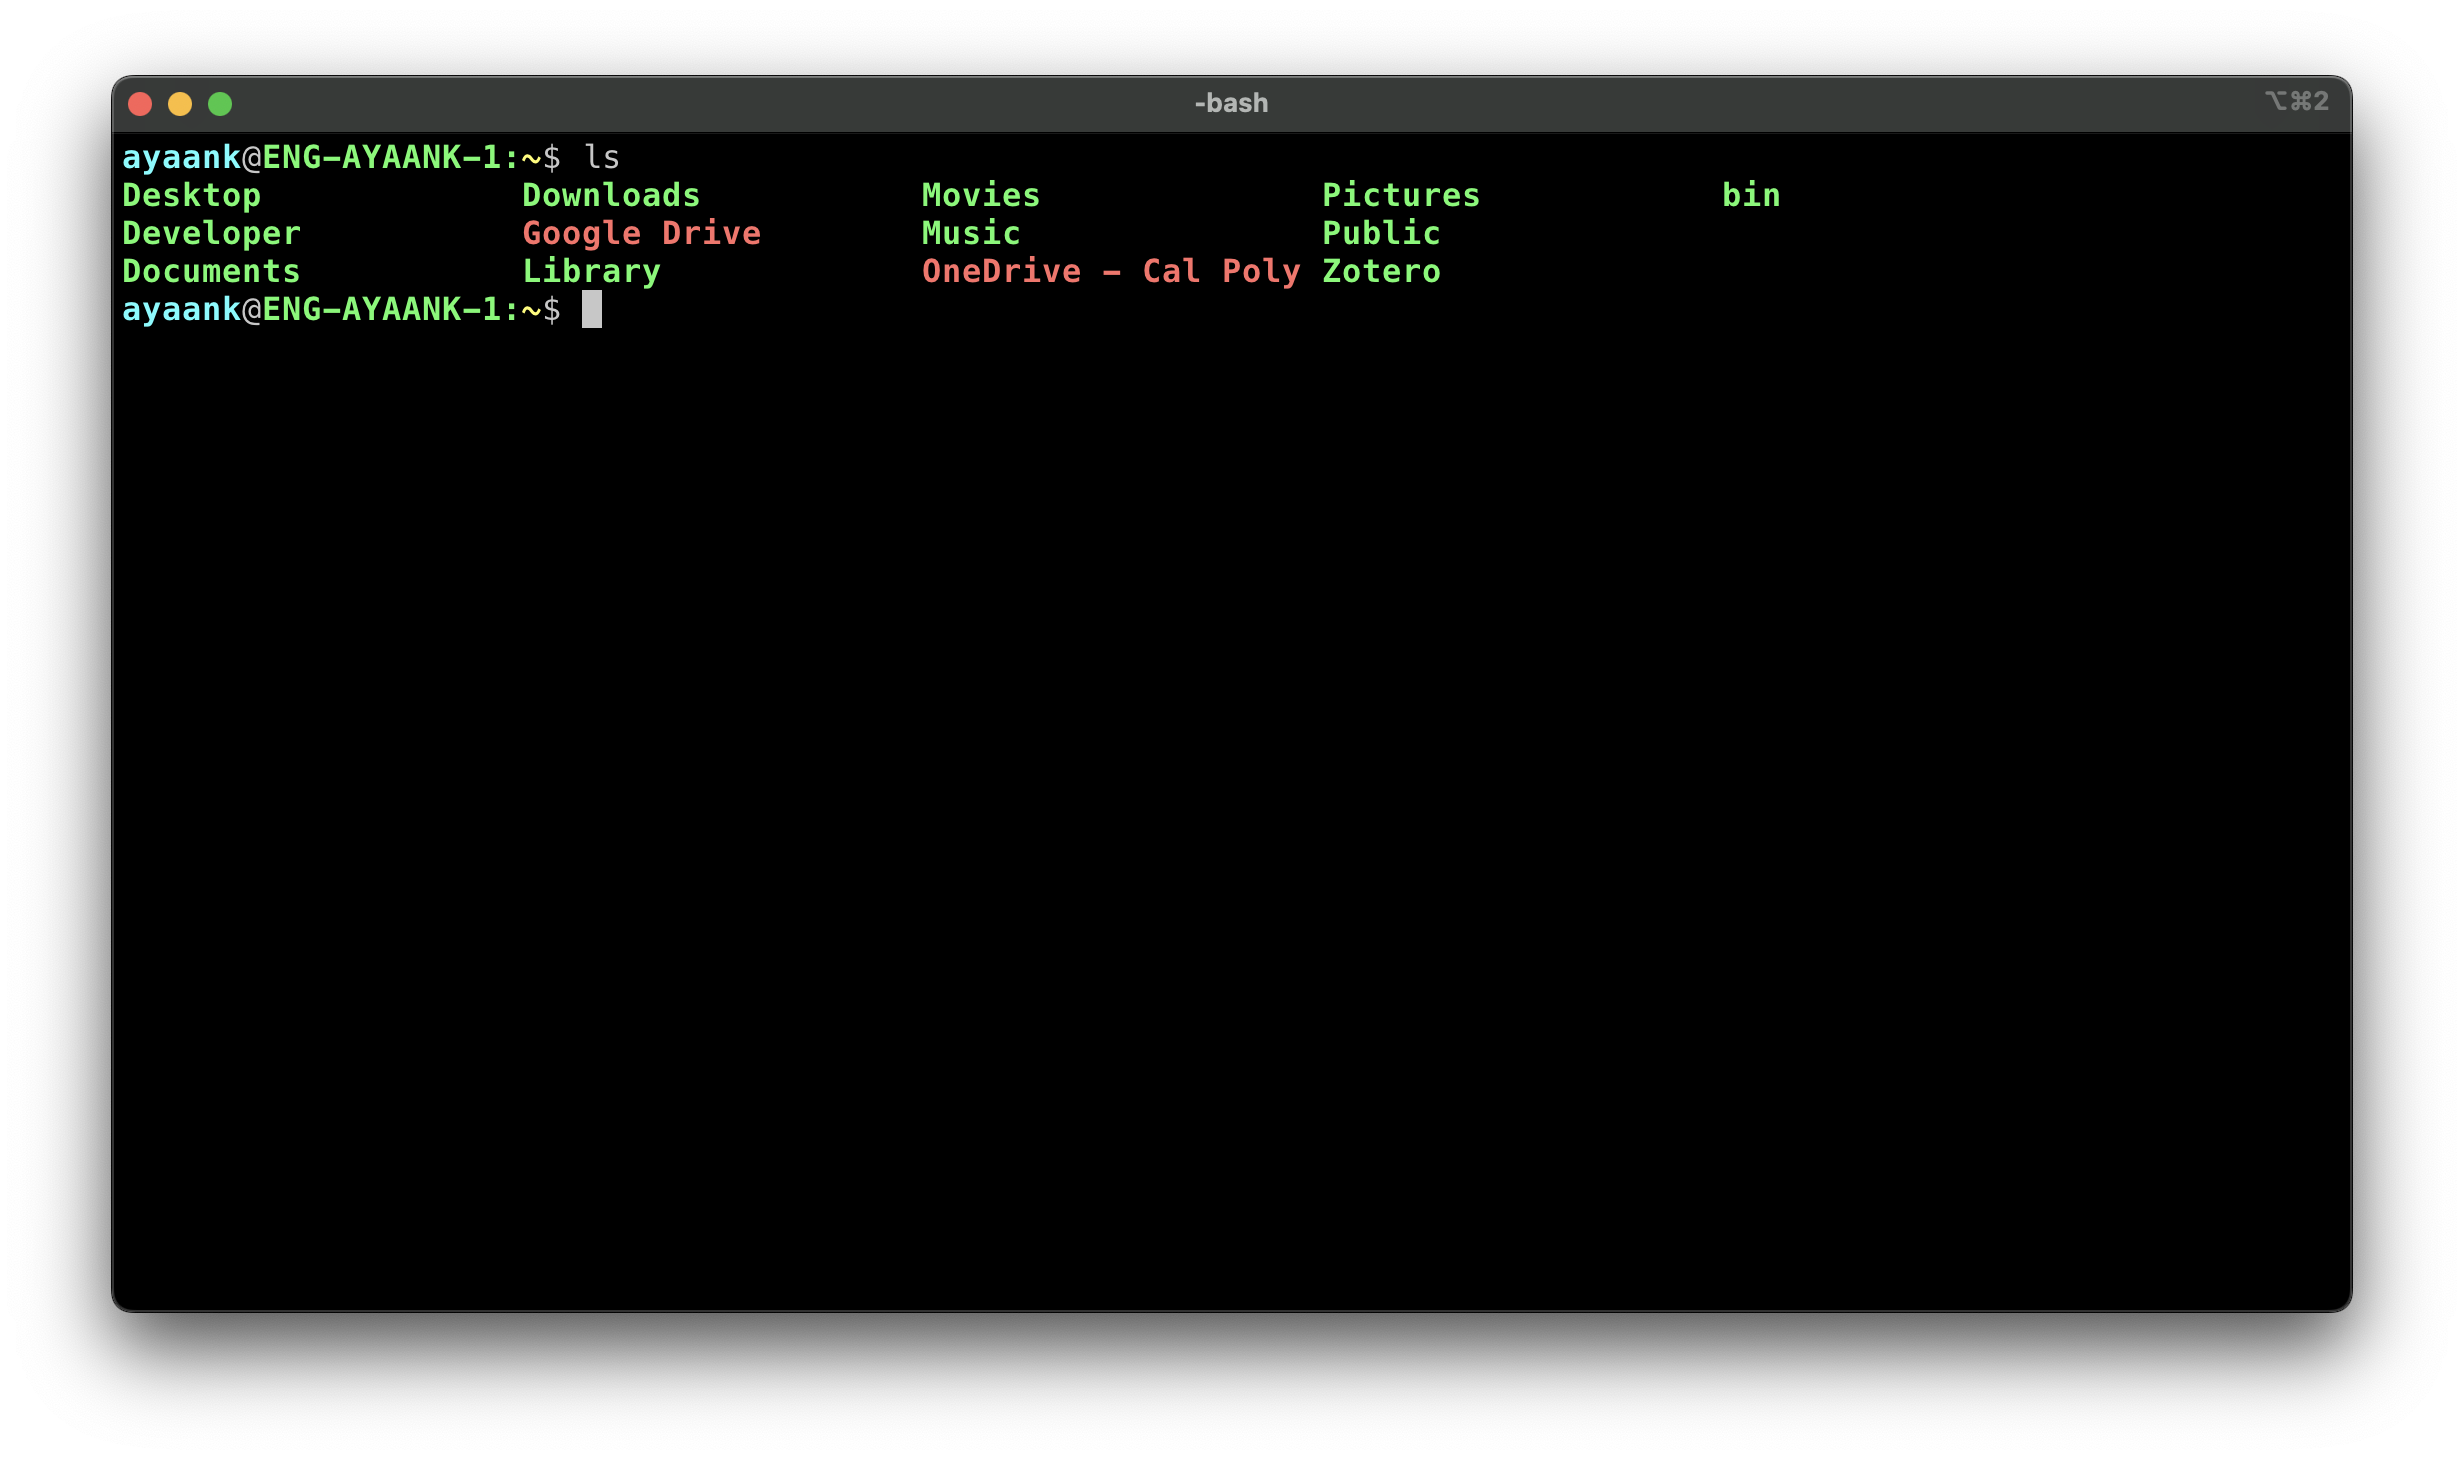 A screenshot of the iTerm app in macOS, depicting the contents of a home folder.